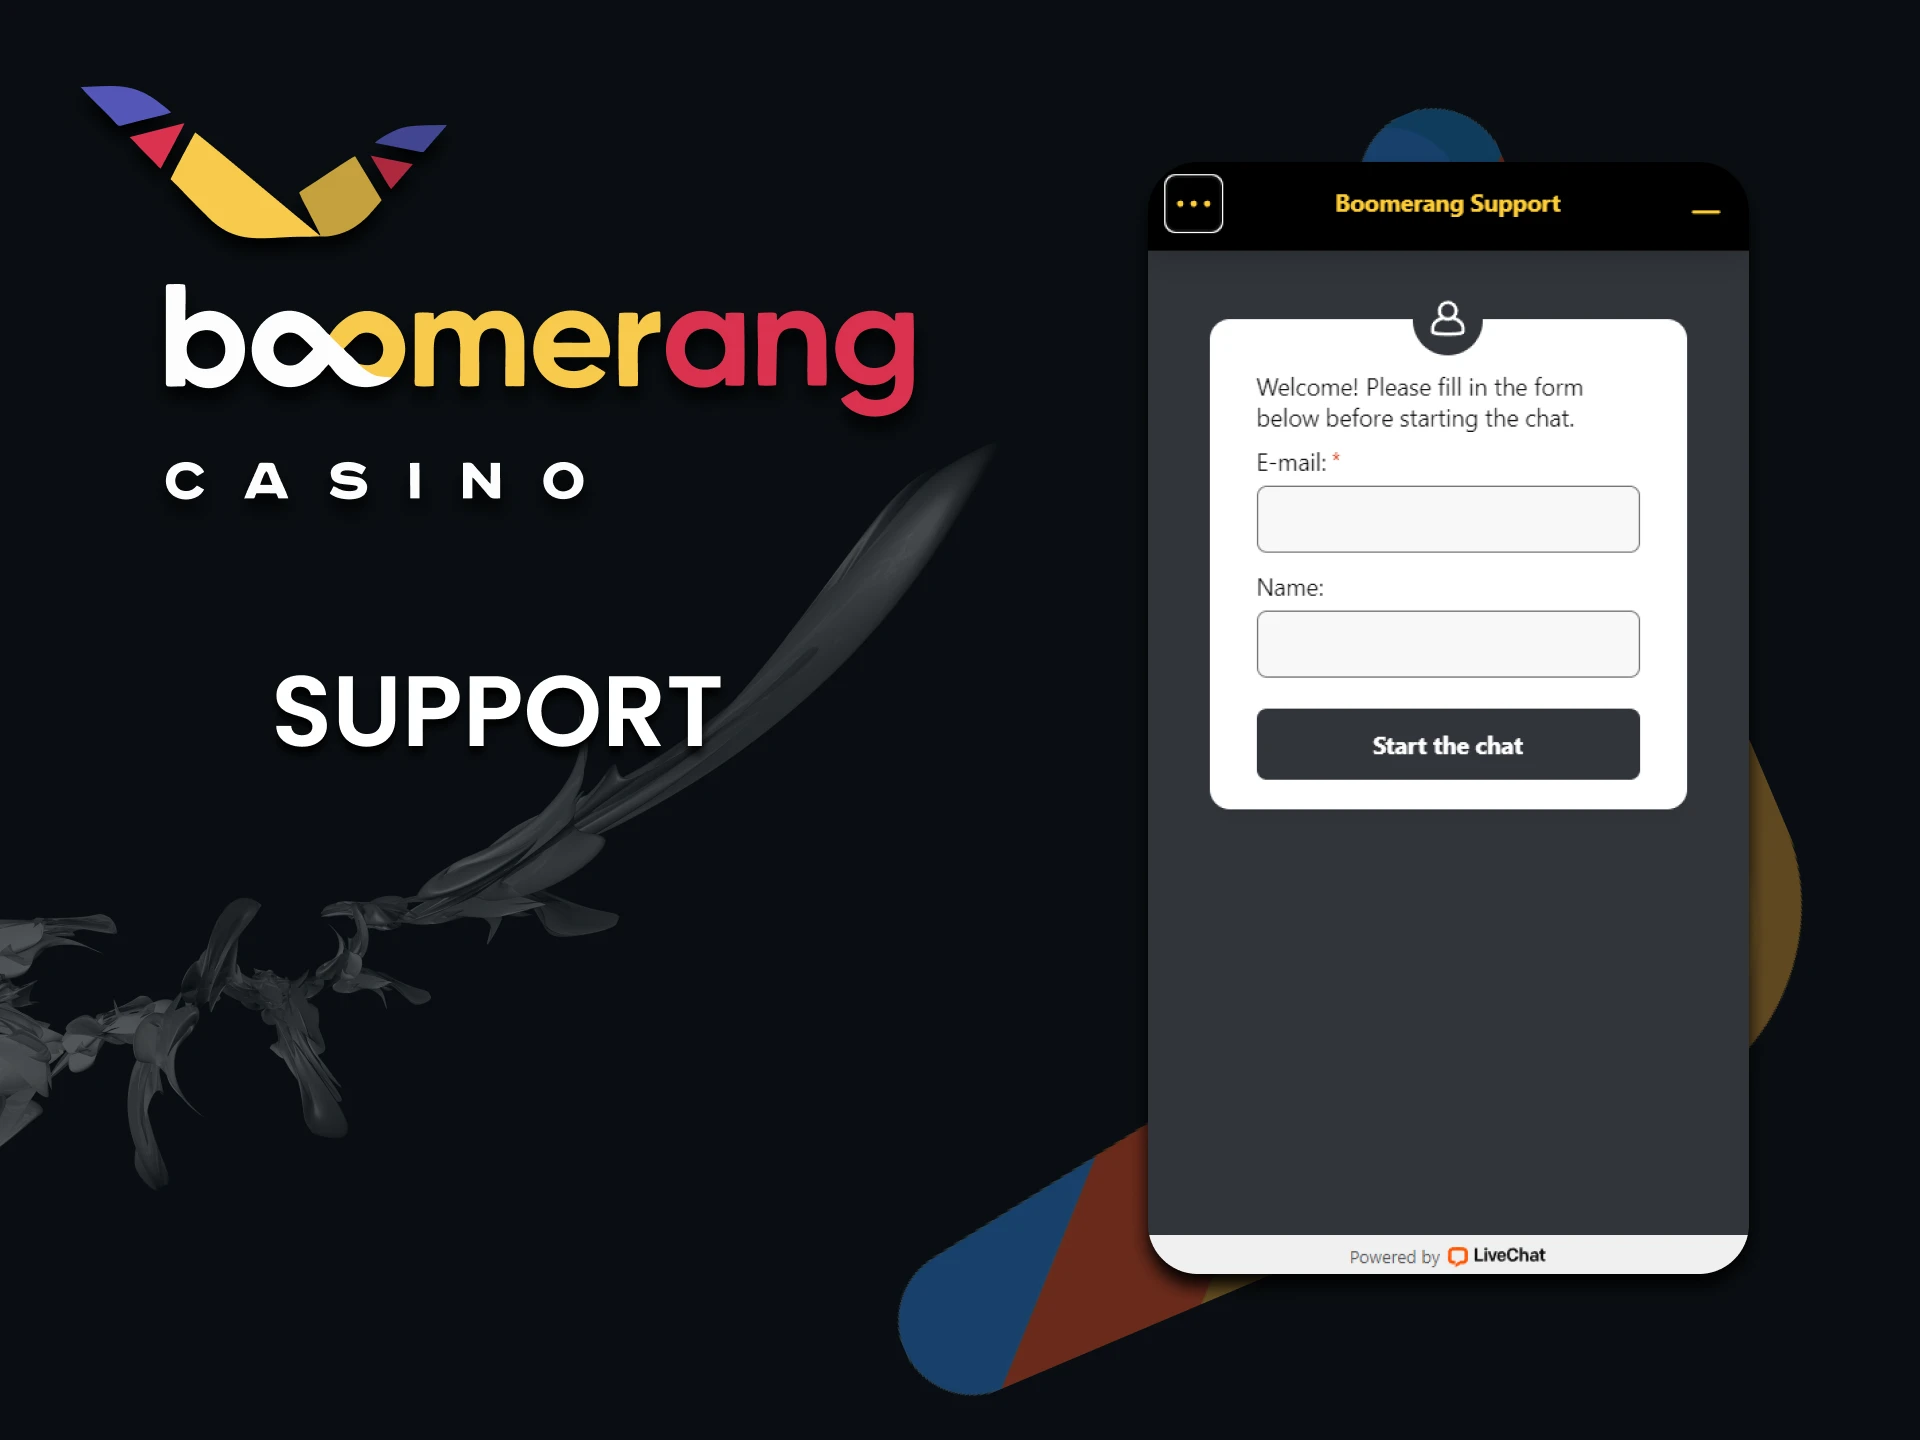 The Boomerang Casino website has a high level of support.